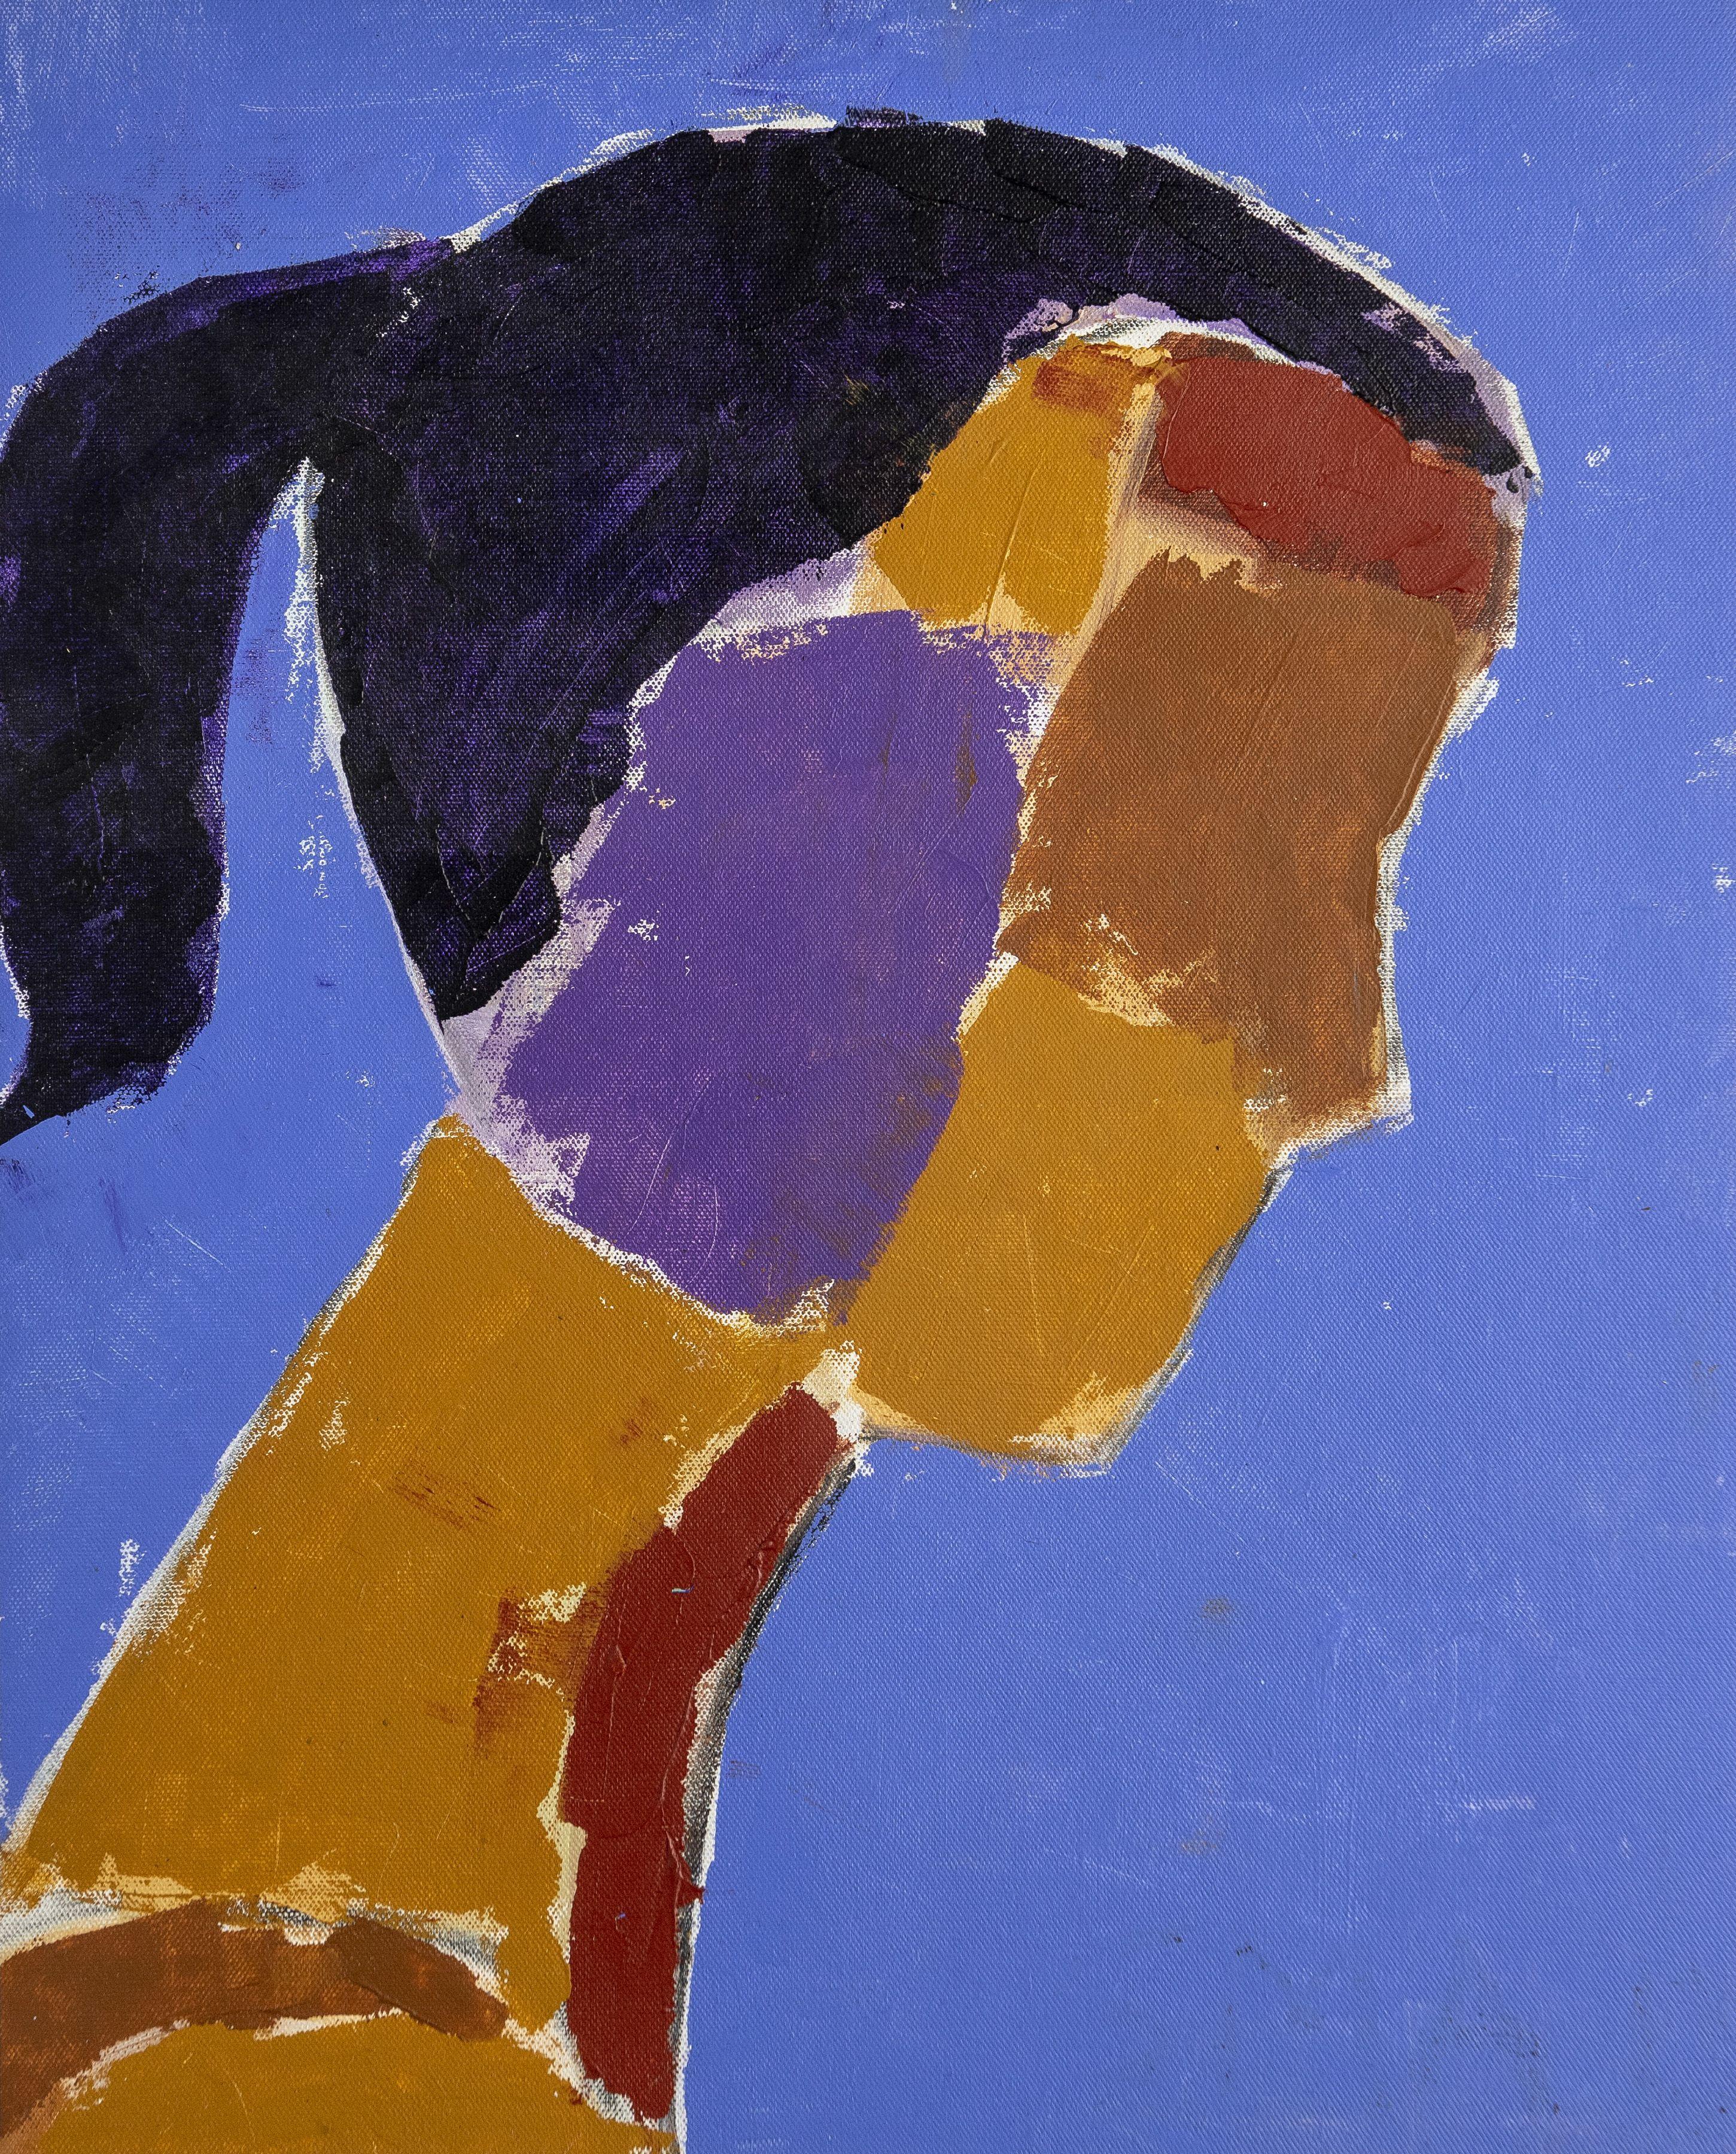 This work is on foam core and is a profile of a young woman.  The painting is typical of the artist's expressionist style and love of geometric form. :: Painting :: Contemporary :: This piece comes with an official certificate of authenticity signed